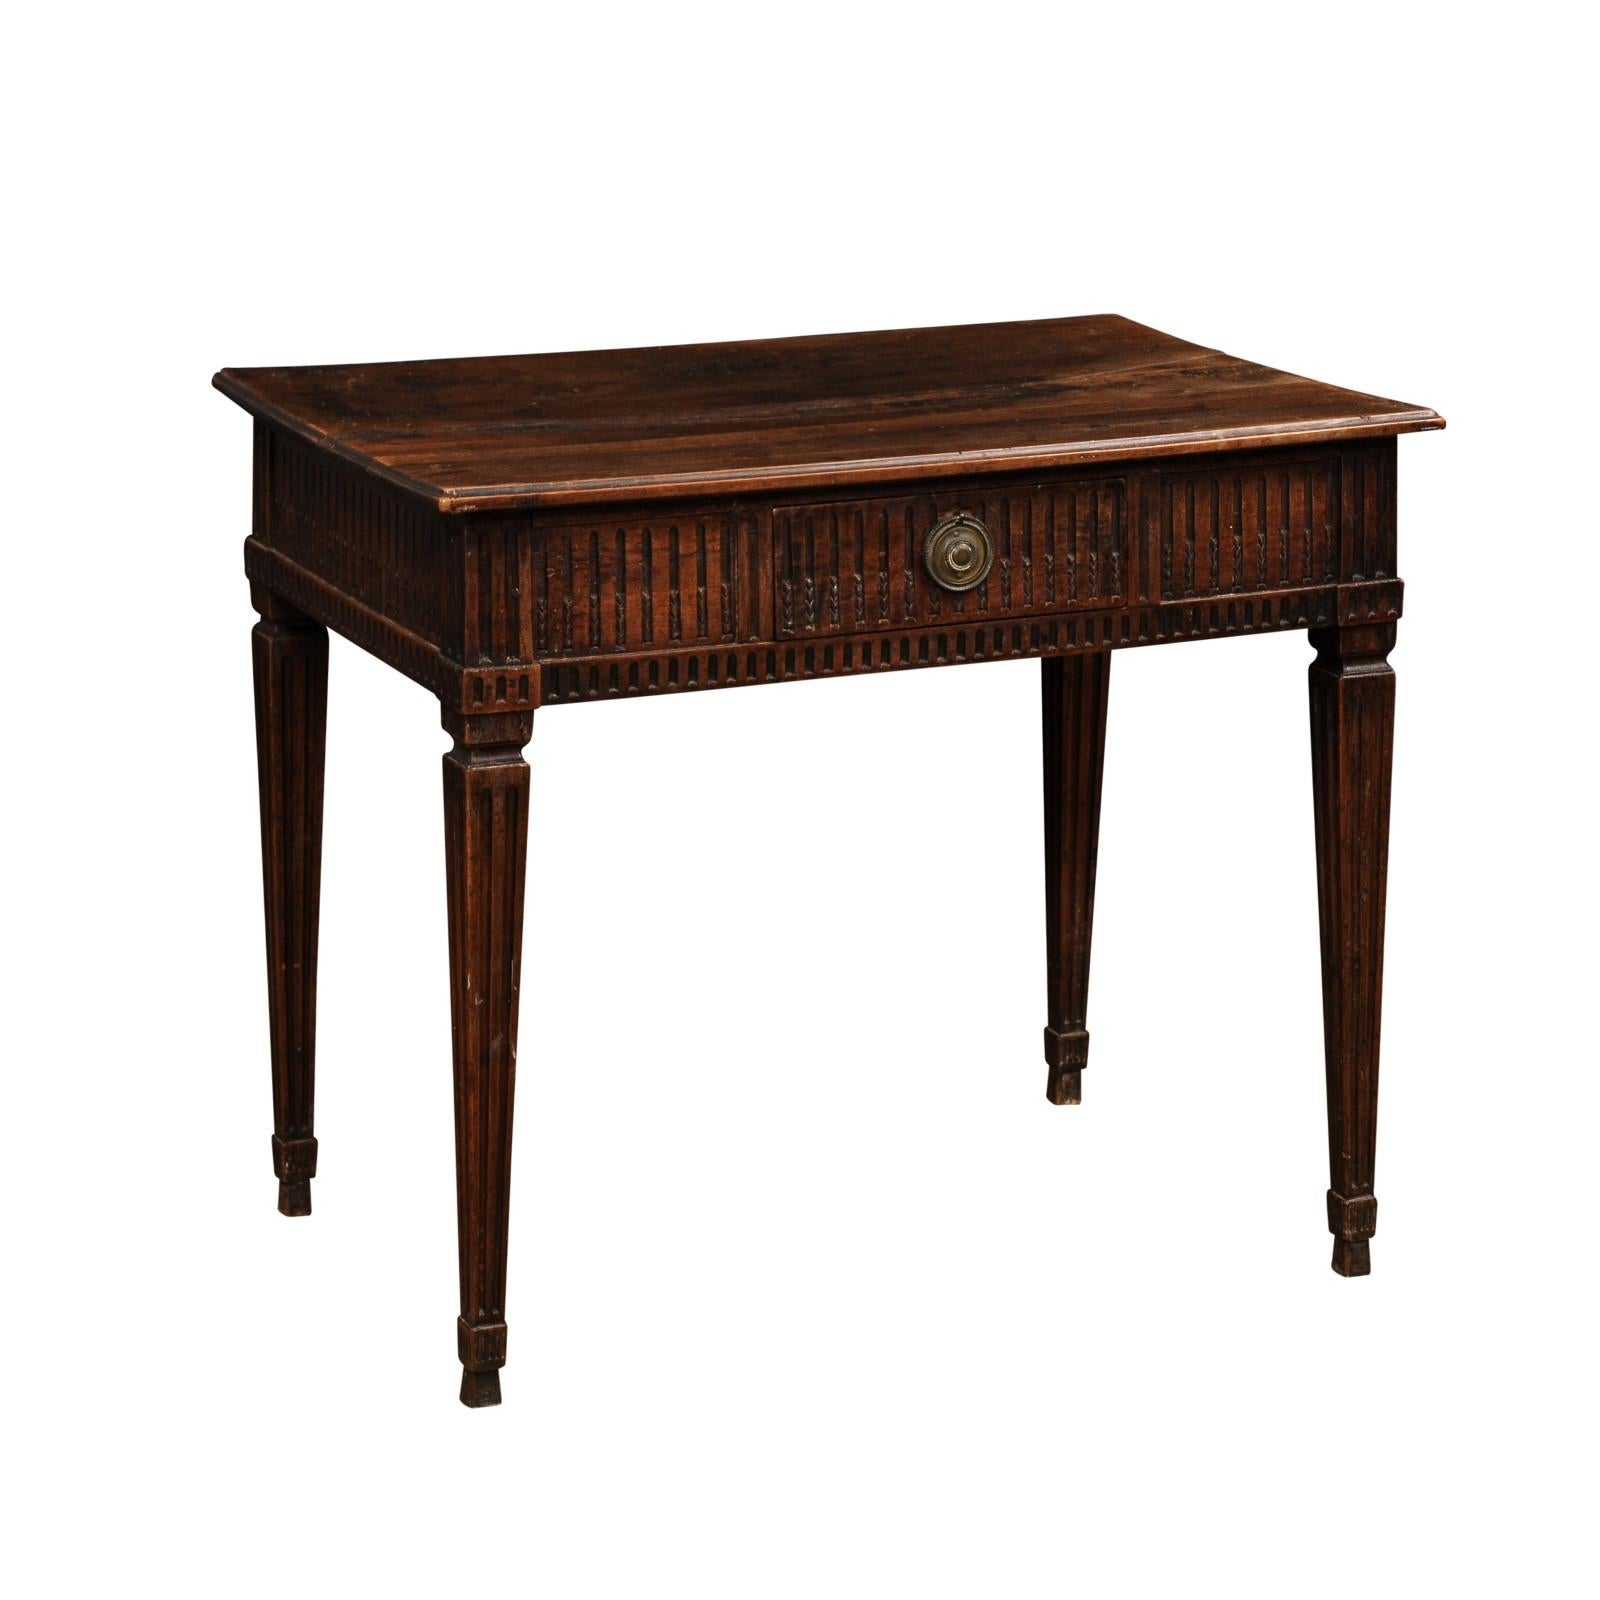 A French Louis XVI period walnut desk from the 18th century, with single drawer, carved fluted motifs, tapered legs and dark patina. Created in France during the 18th century, this walnut desk showcases the stylistic characteristics typical of the